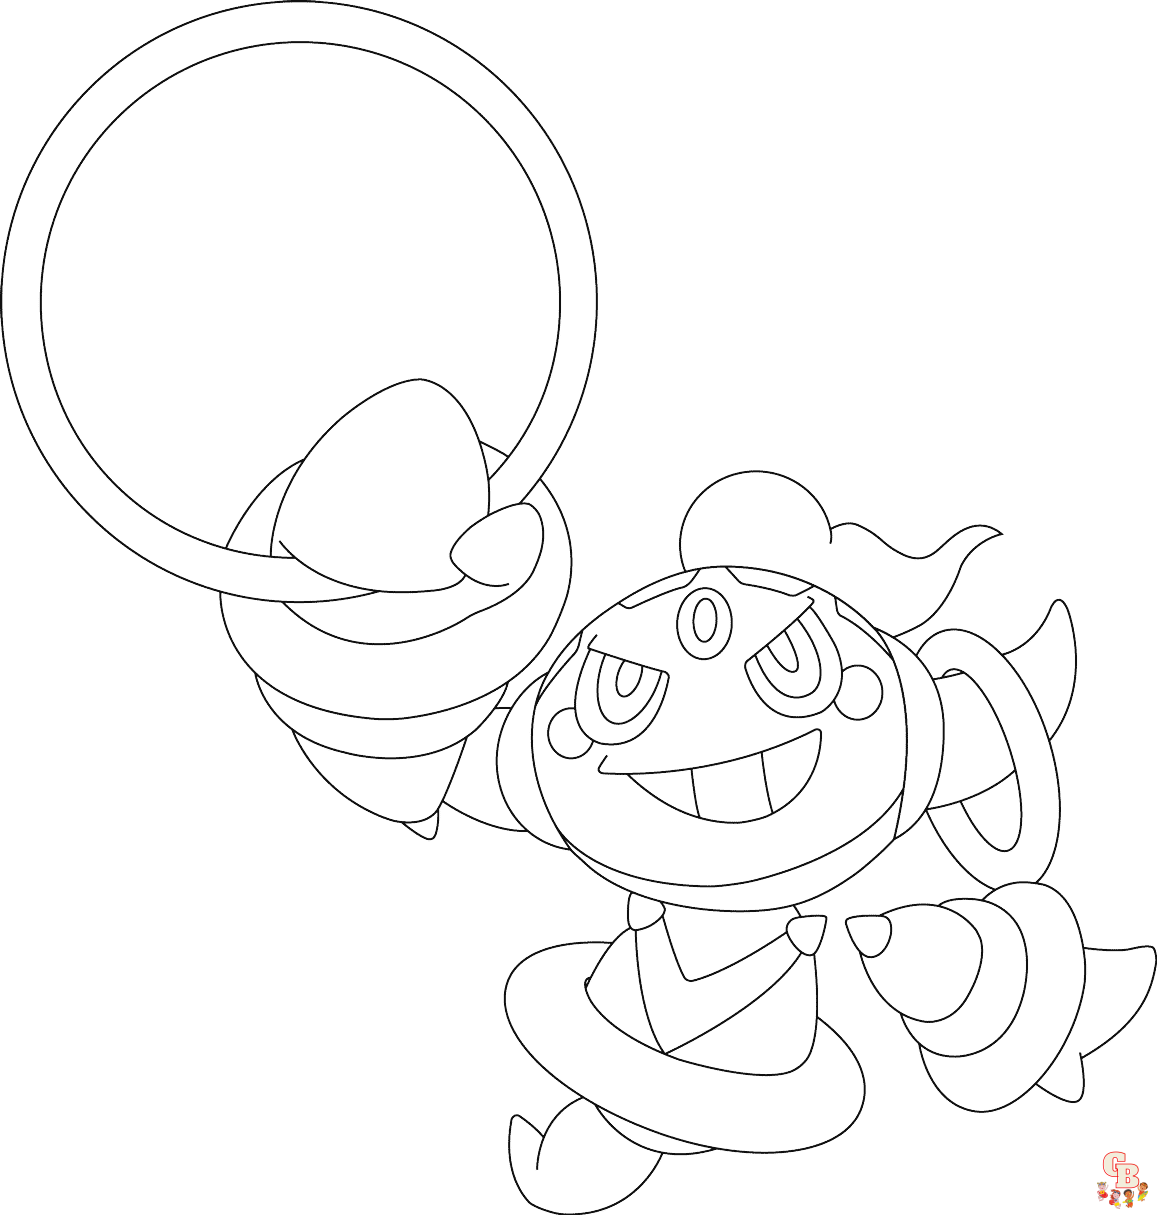 Pokemon Hoopa coloring pages printable